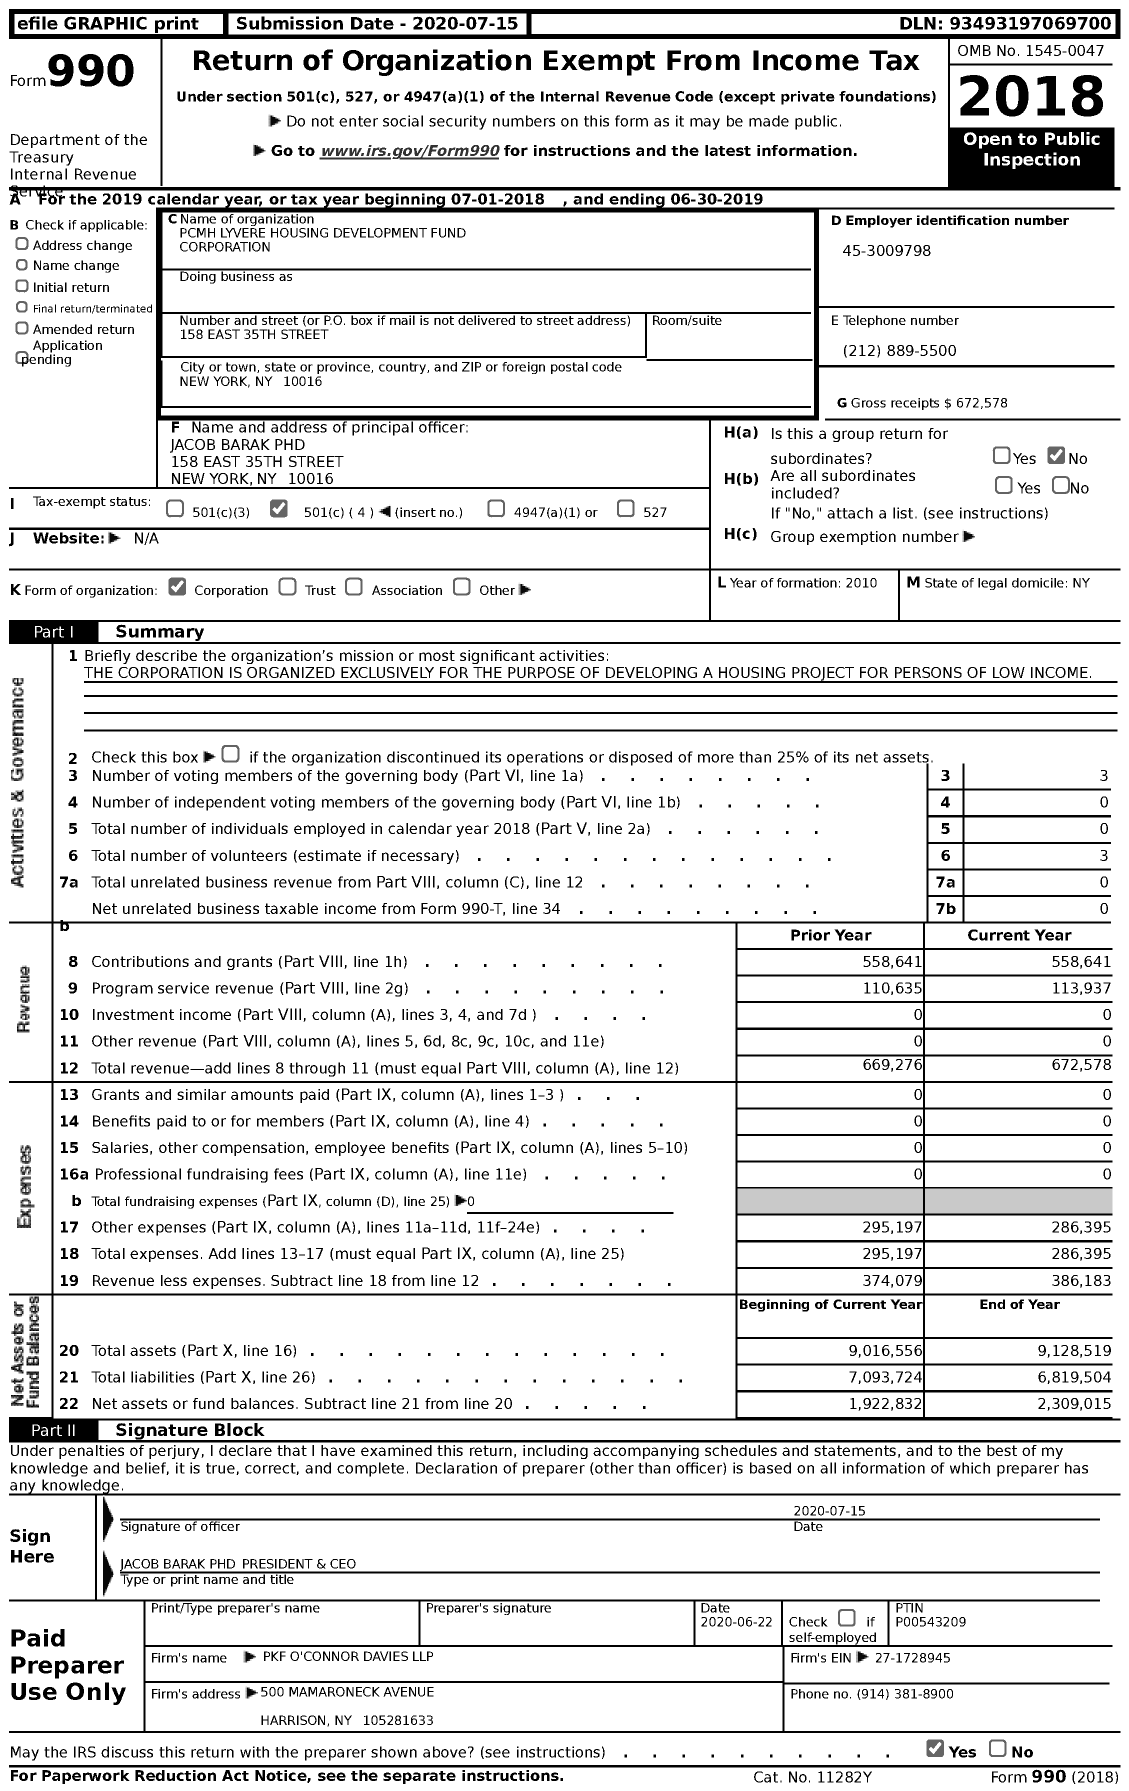 Image of first page of 2018 Form 990 for PCMH Lyvere Housing Development Fund Corporation